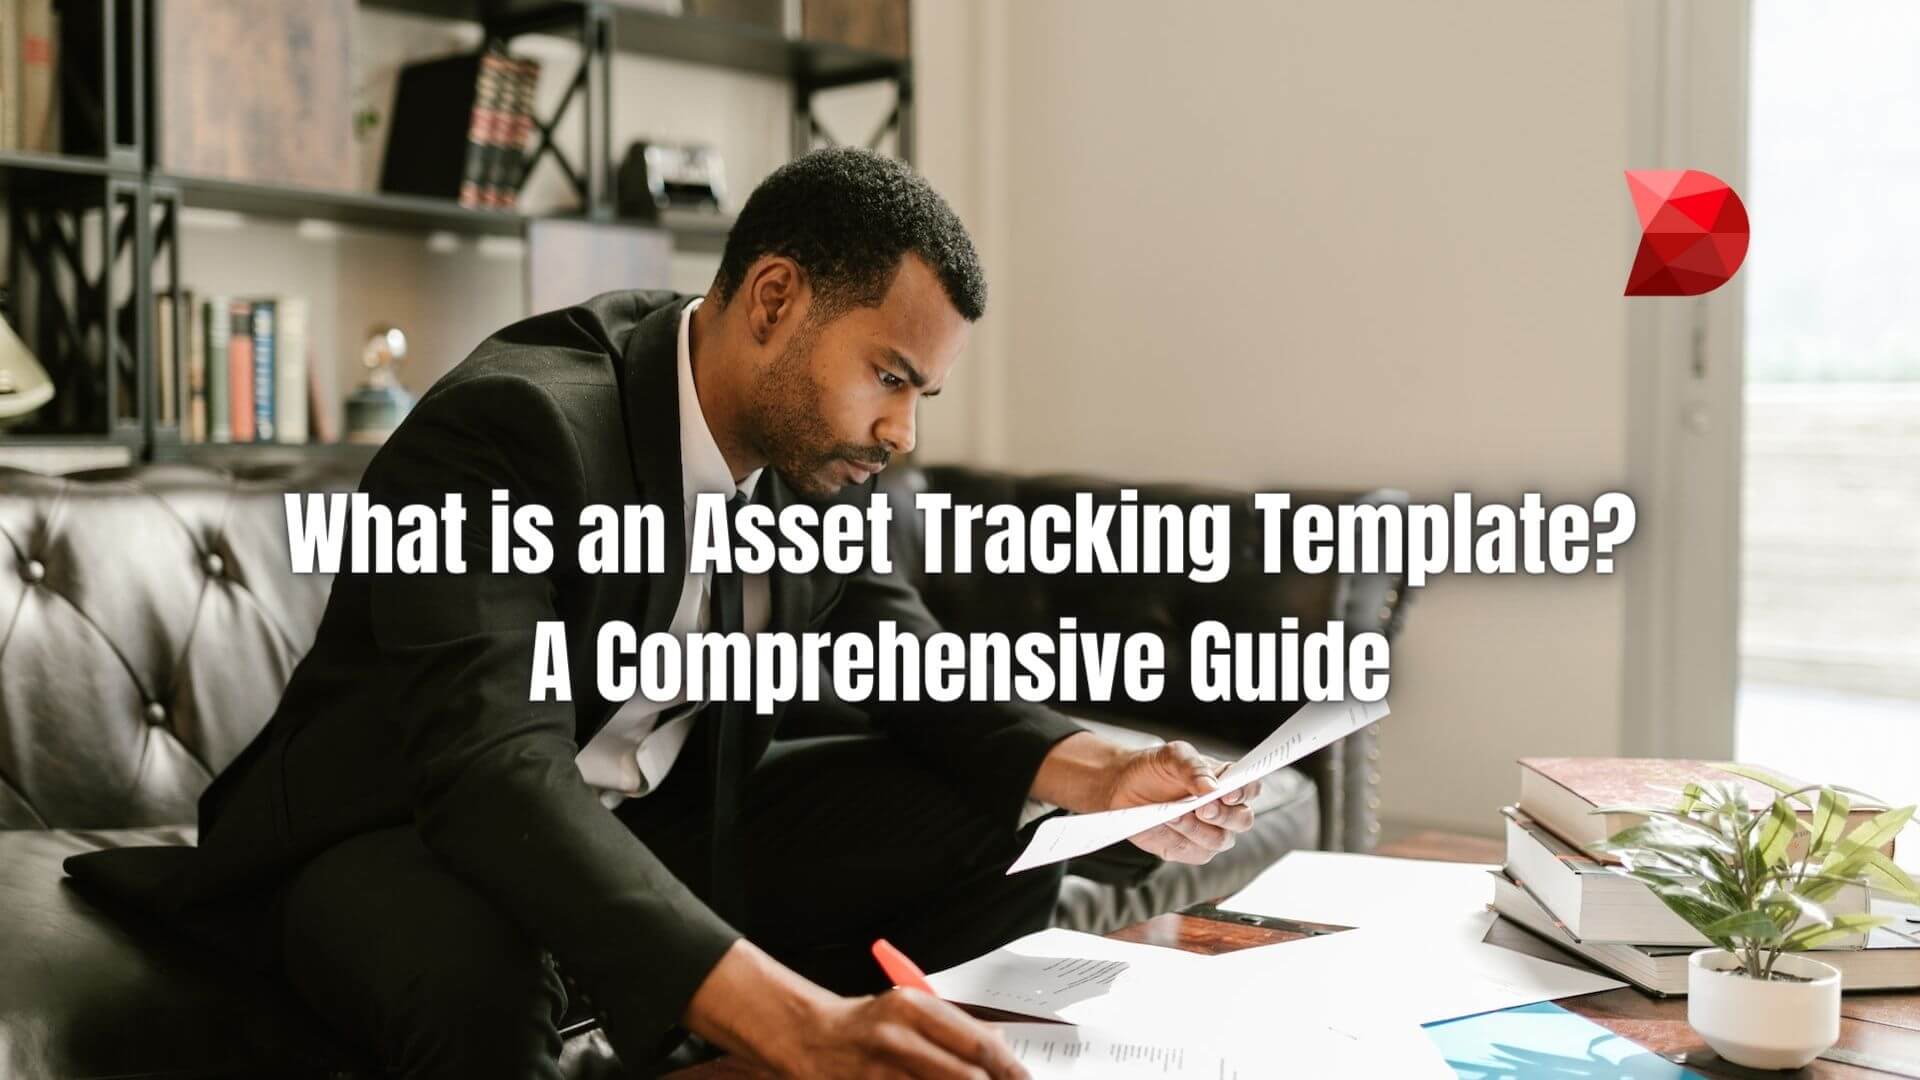 Do you want to streamline the process of tracking your organization's assets? Asset tracking templates can make it easier. Learn how!